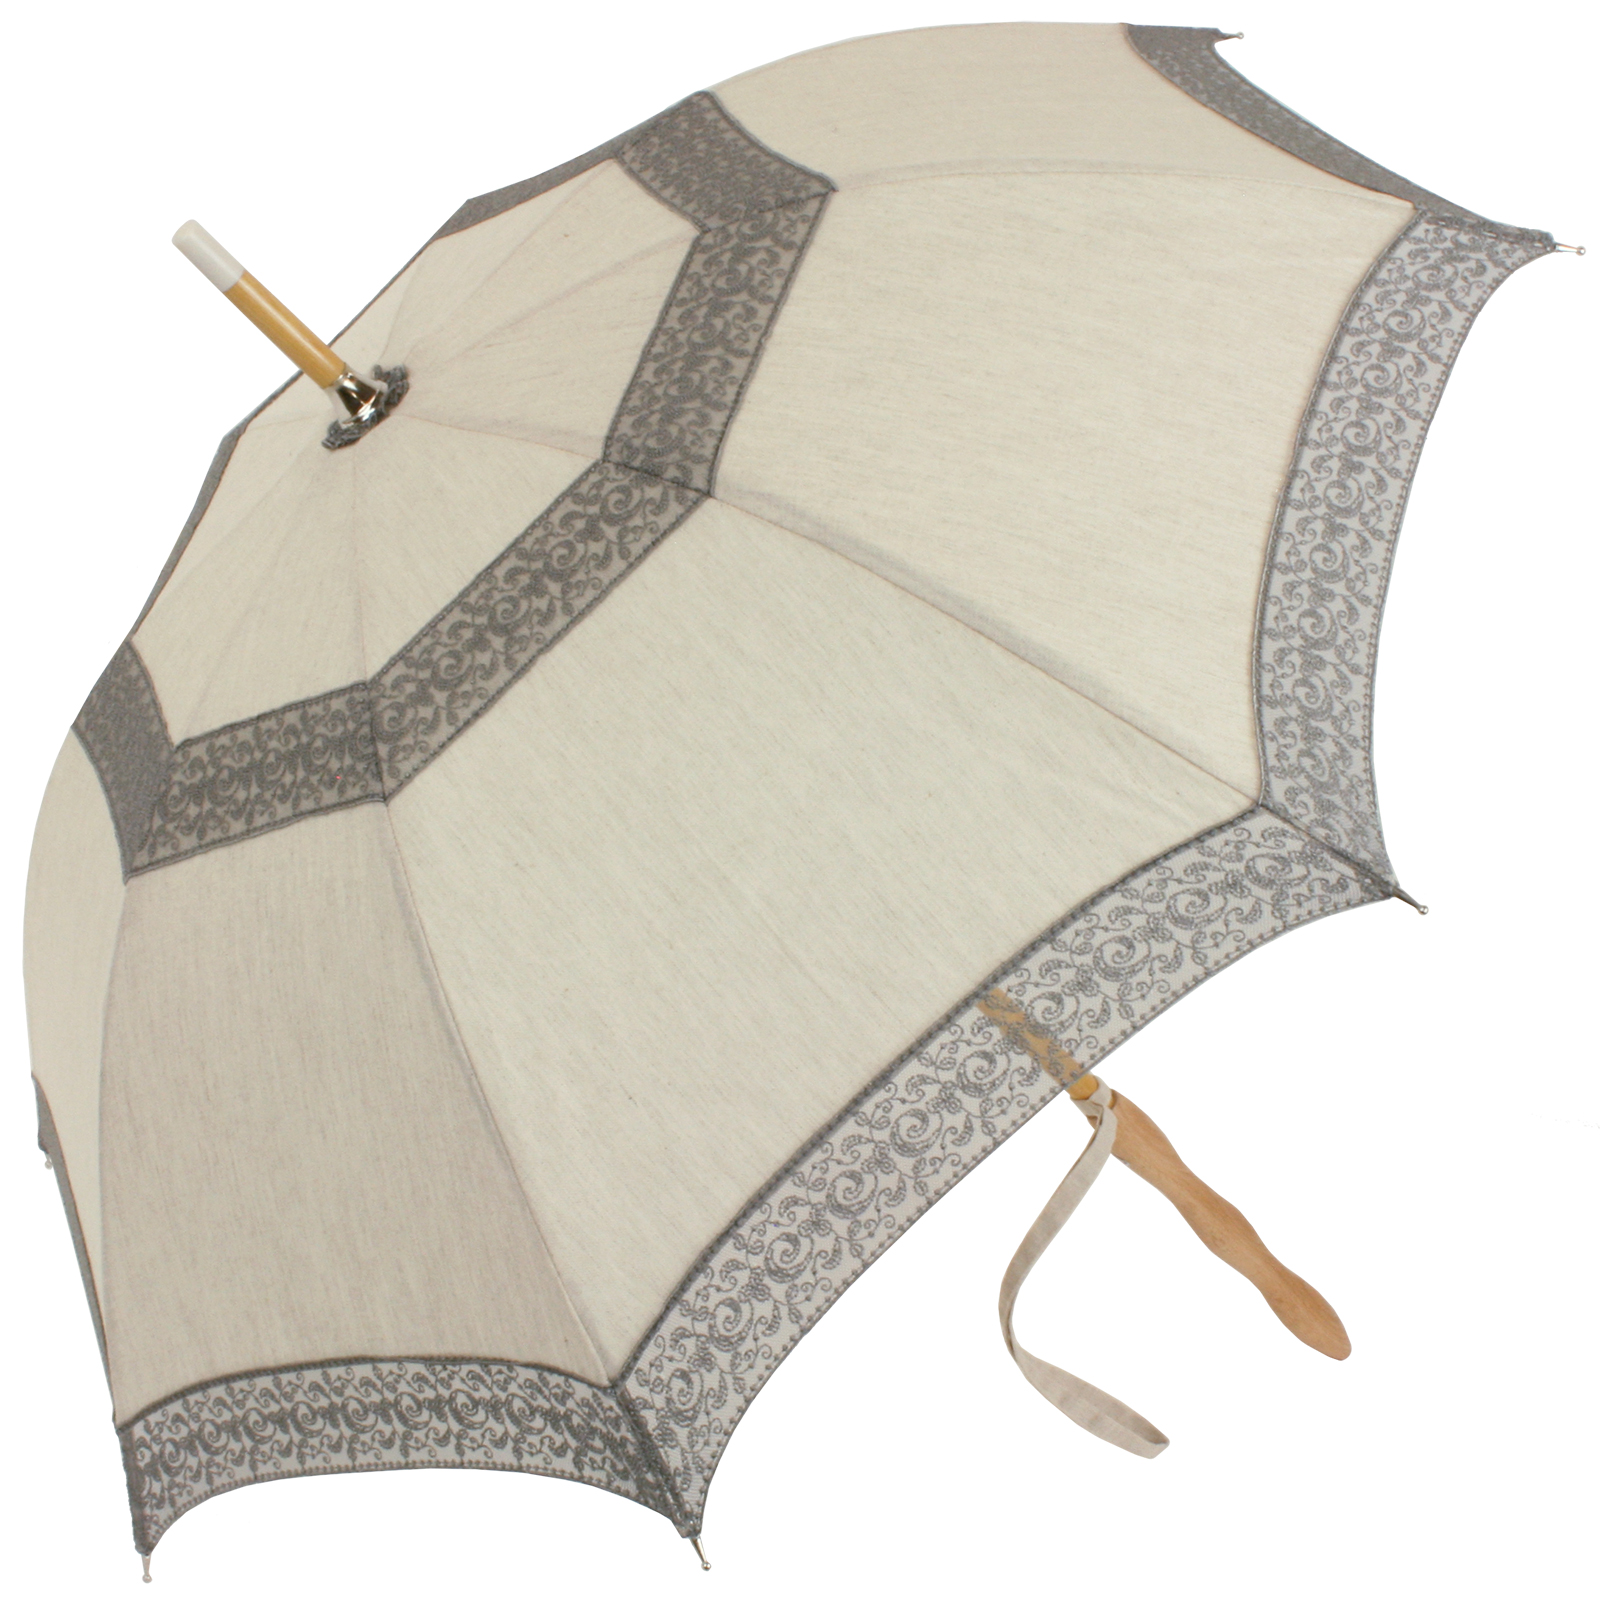 Eleonore - UVP Beige Parasol with Grey Curl Lace Bands by Pierre Vaux